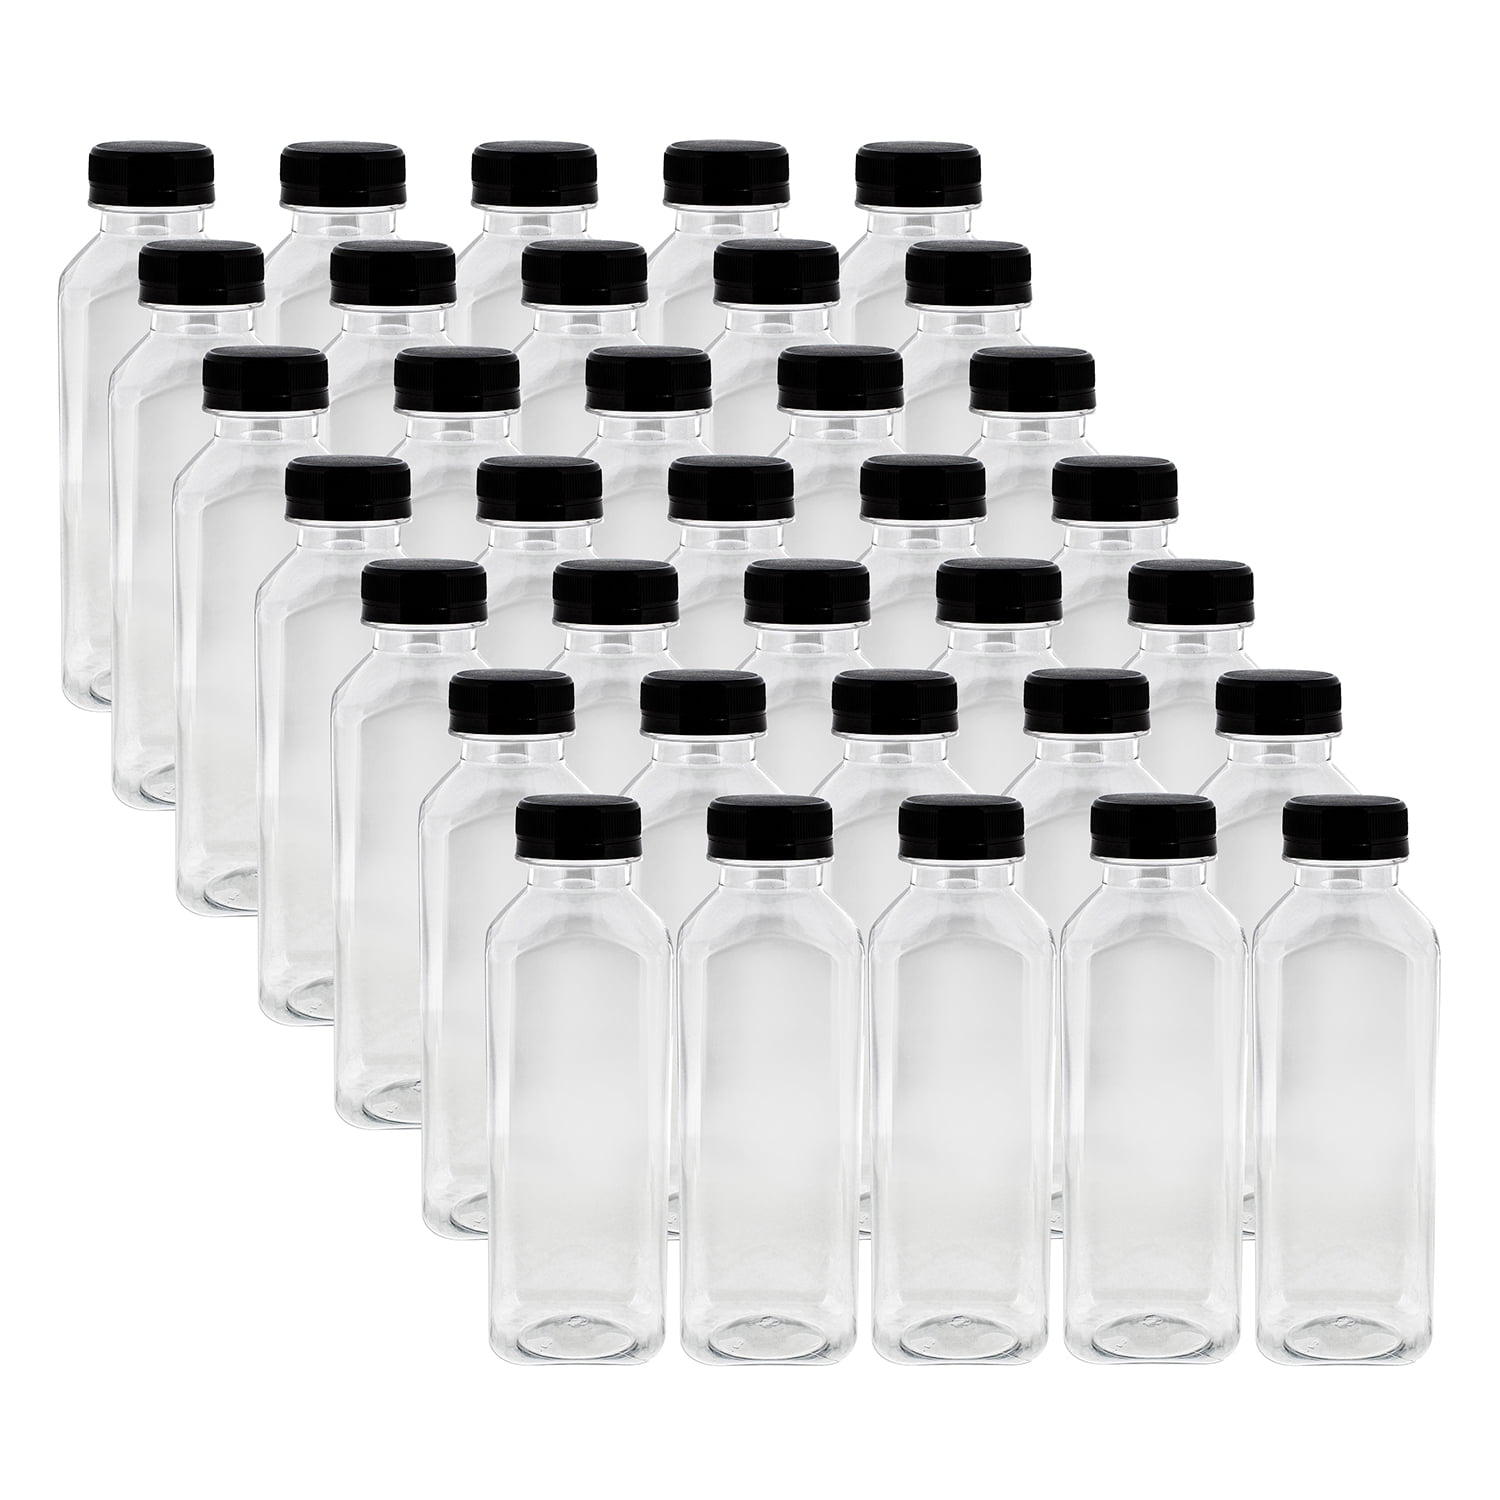 BPA Free Details about   16 Oz Empty Plastic Juice Bottles Set Of 33 With Tamper Evident Caps 